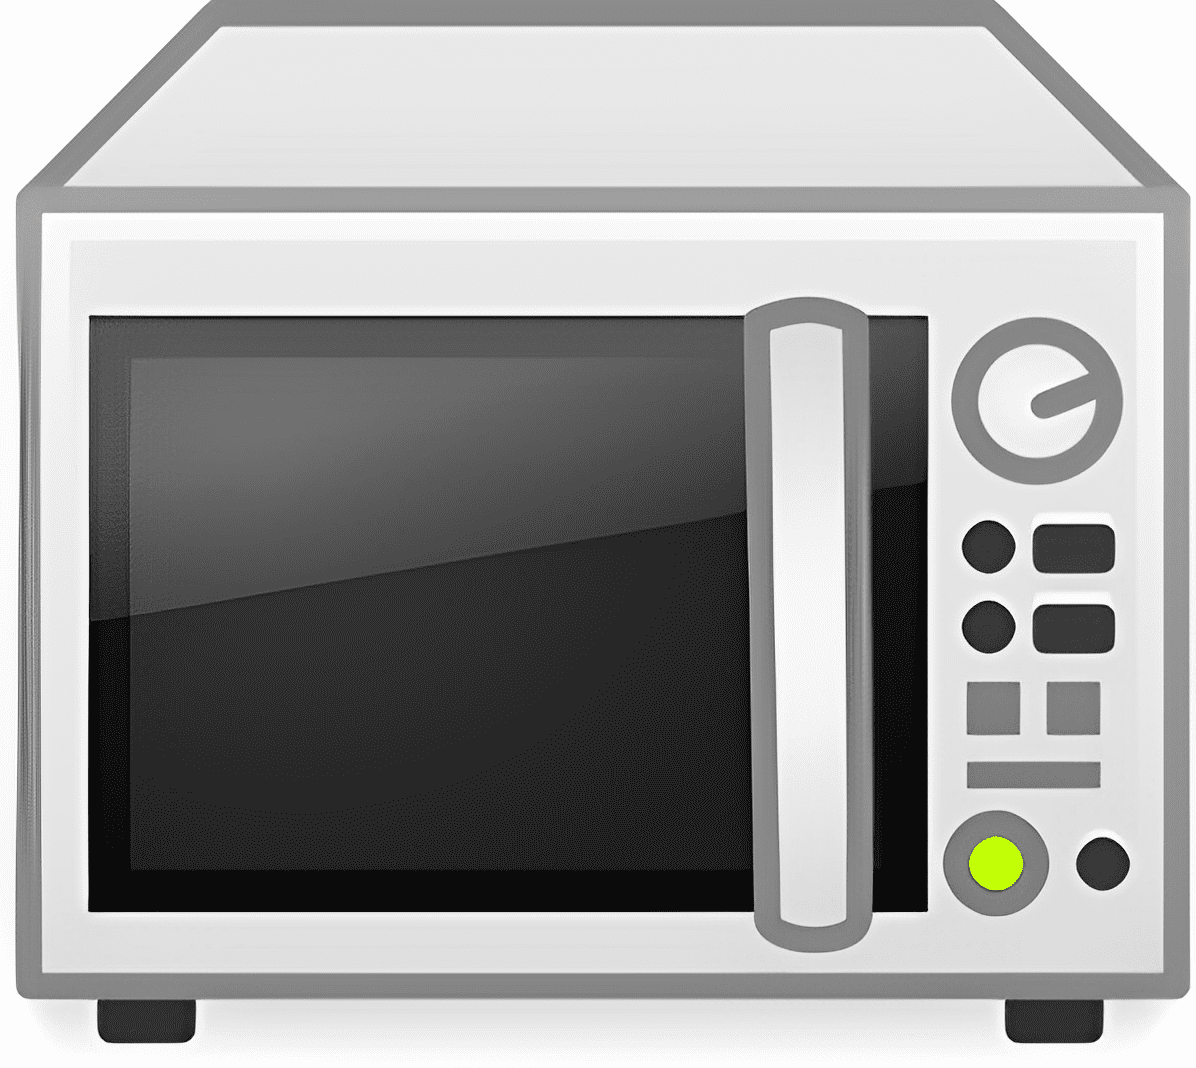 Microwave Clipart Images